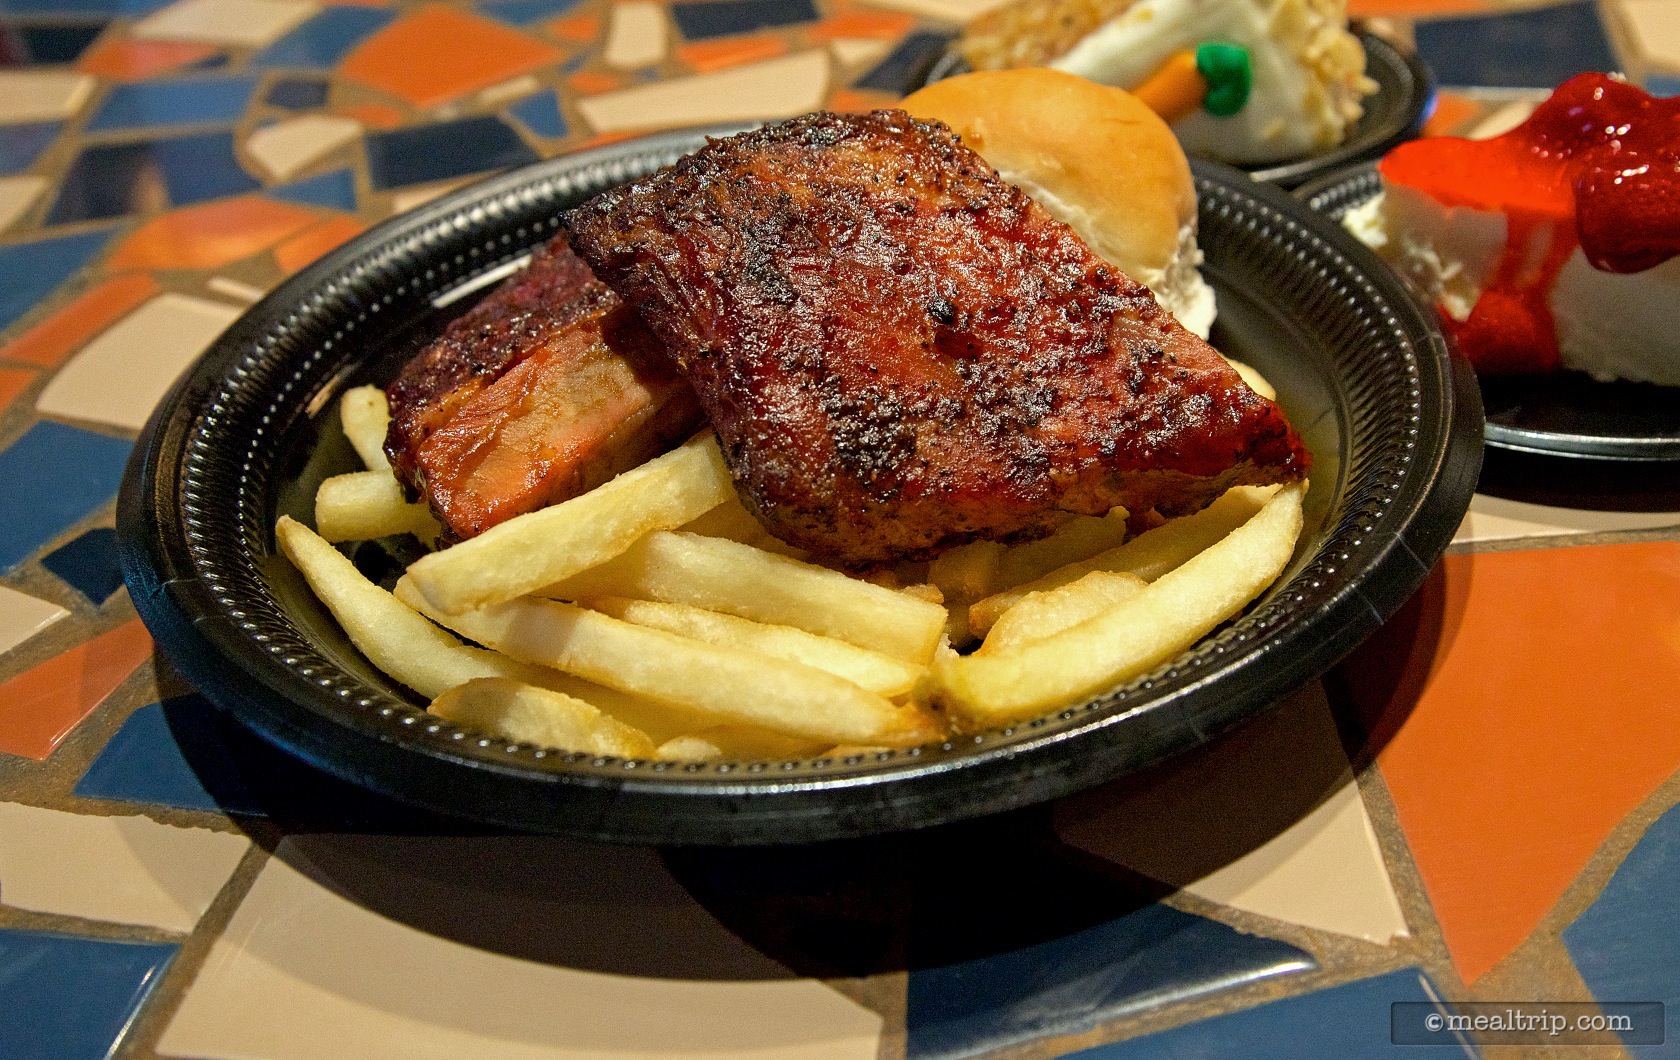 voyager's smokehouse seaworld hours